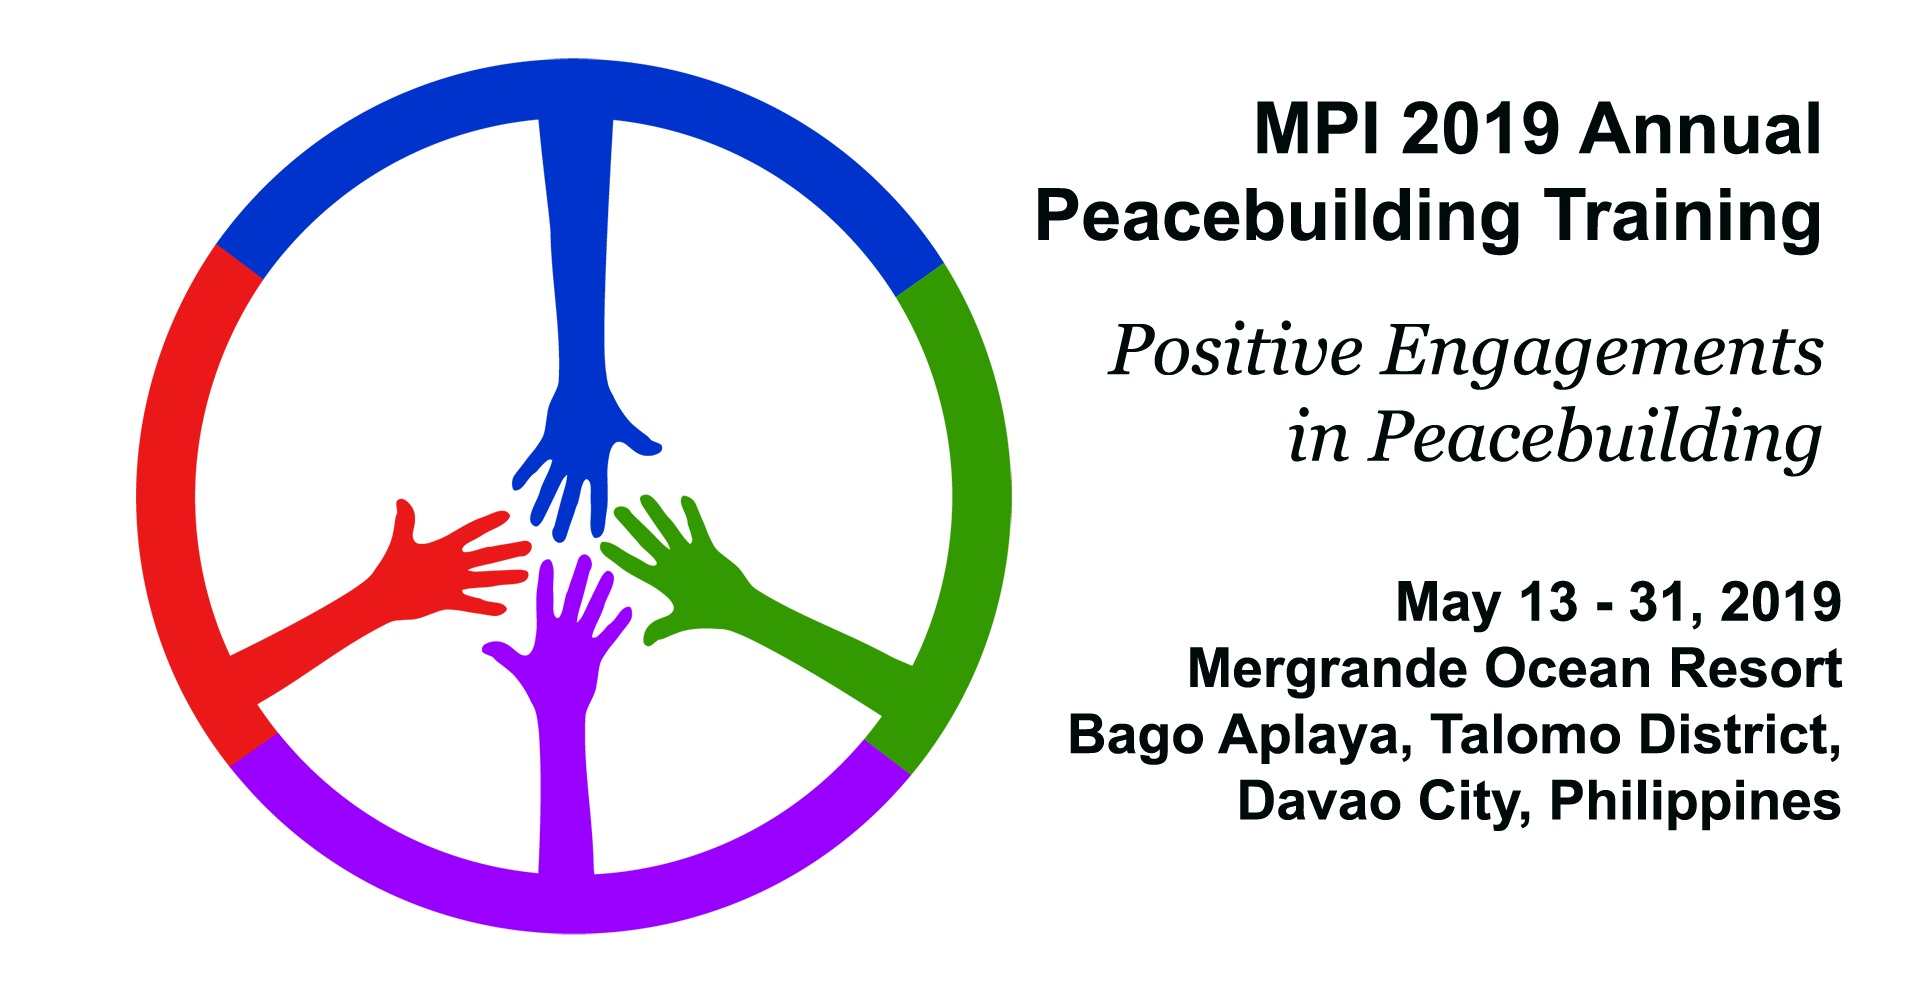 MPI 2019 Logo colored hands forming peace sign